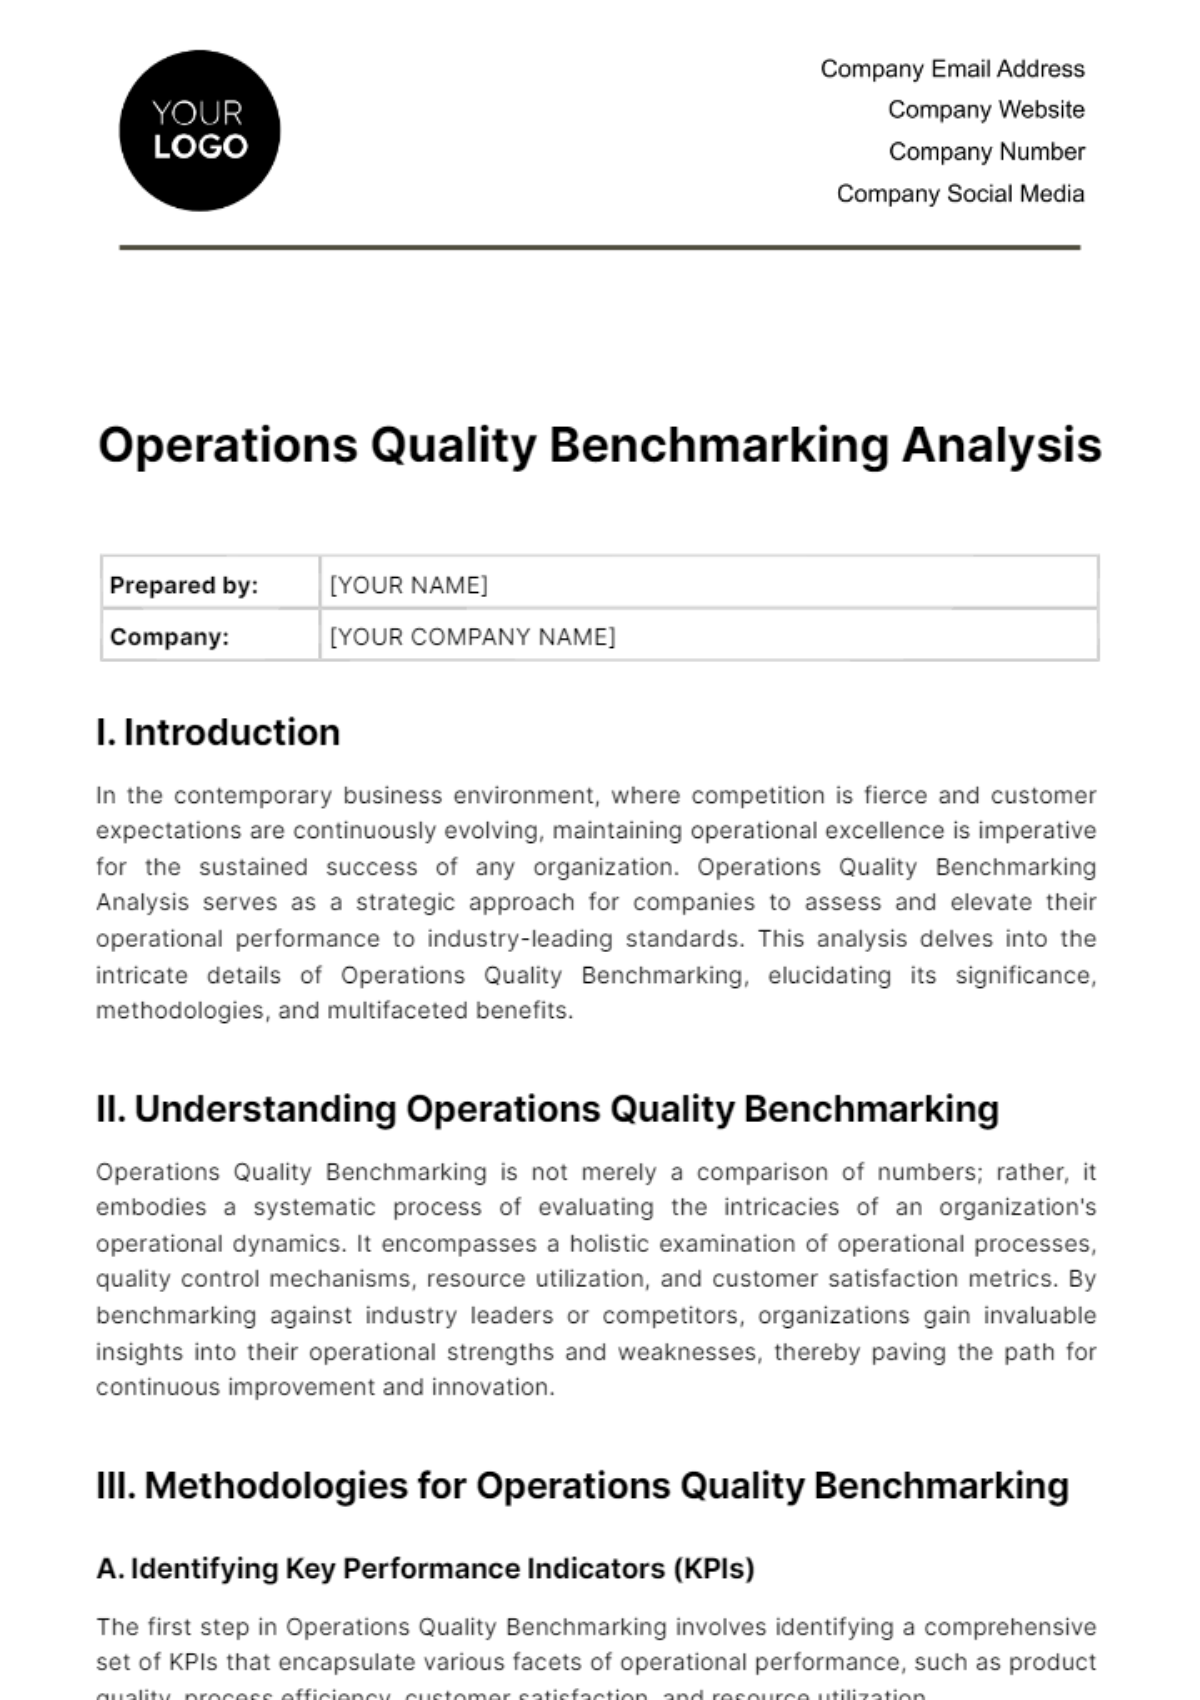 Operations Quality Benchmarking Analysis Template